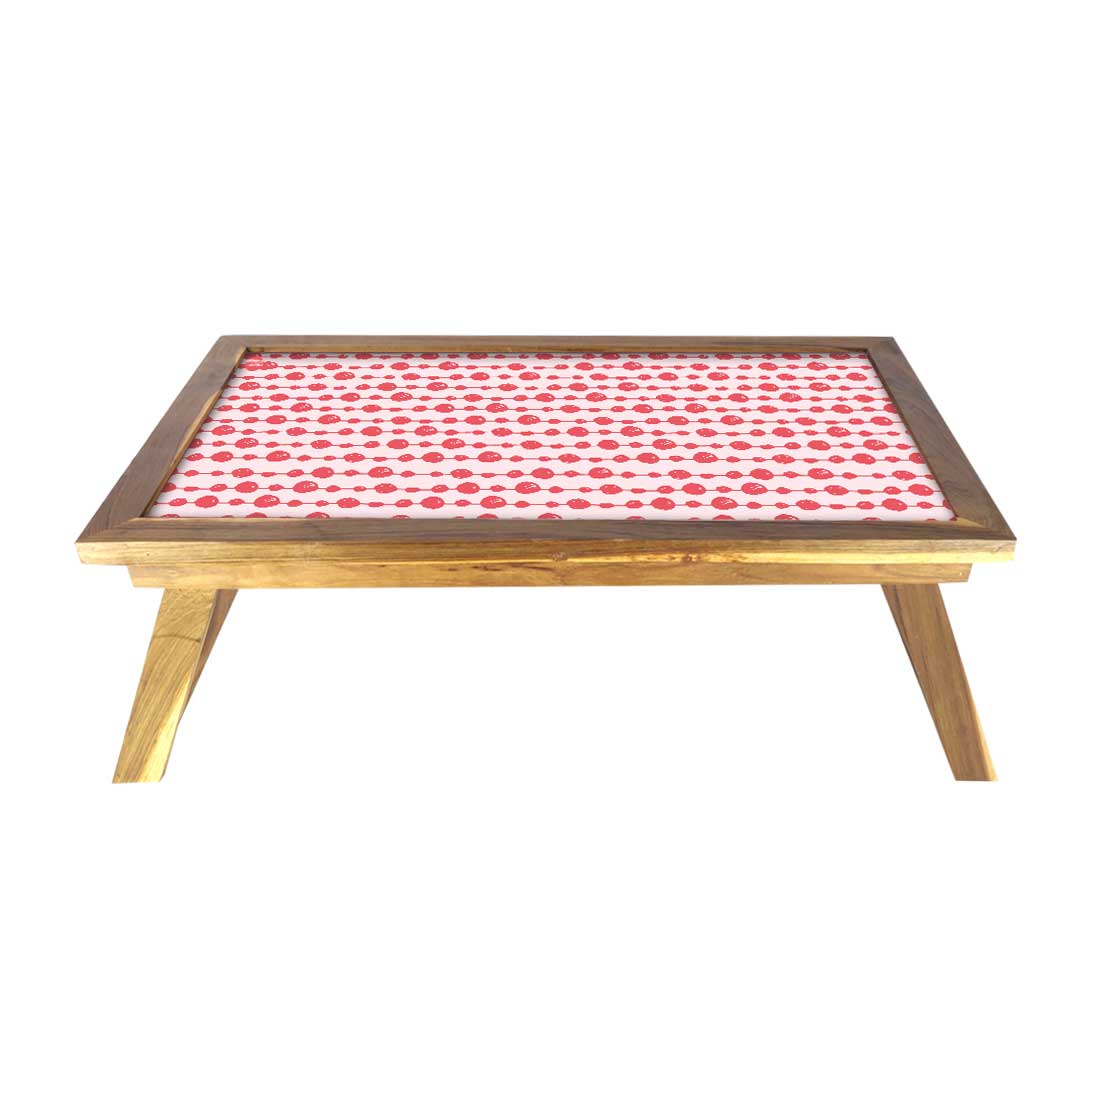 Nutcase Folding Laptop Table For Home Bed Lapdesk Breakfast Table Foldable Teak Wooden Study Desk - Pink White Dots Nutcase